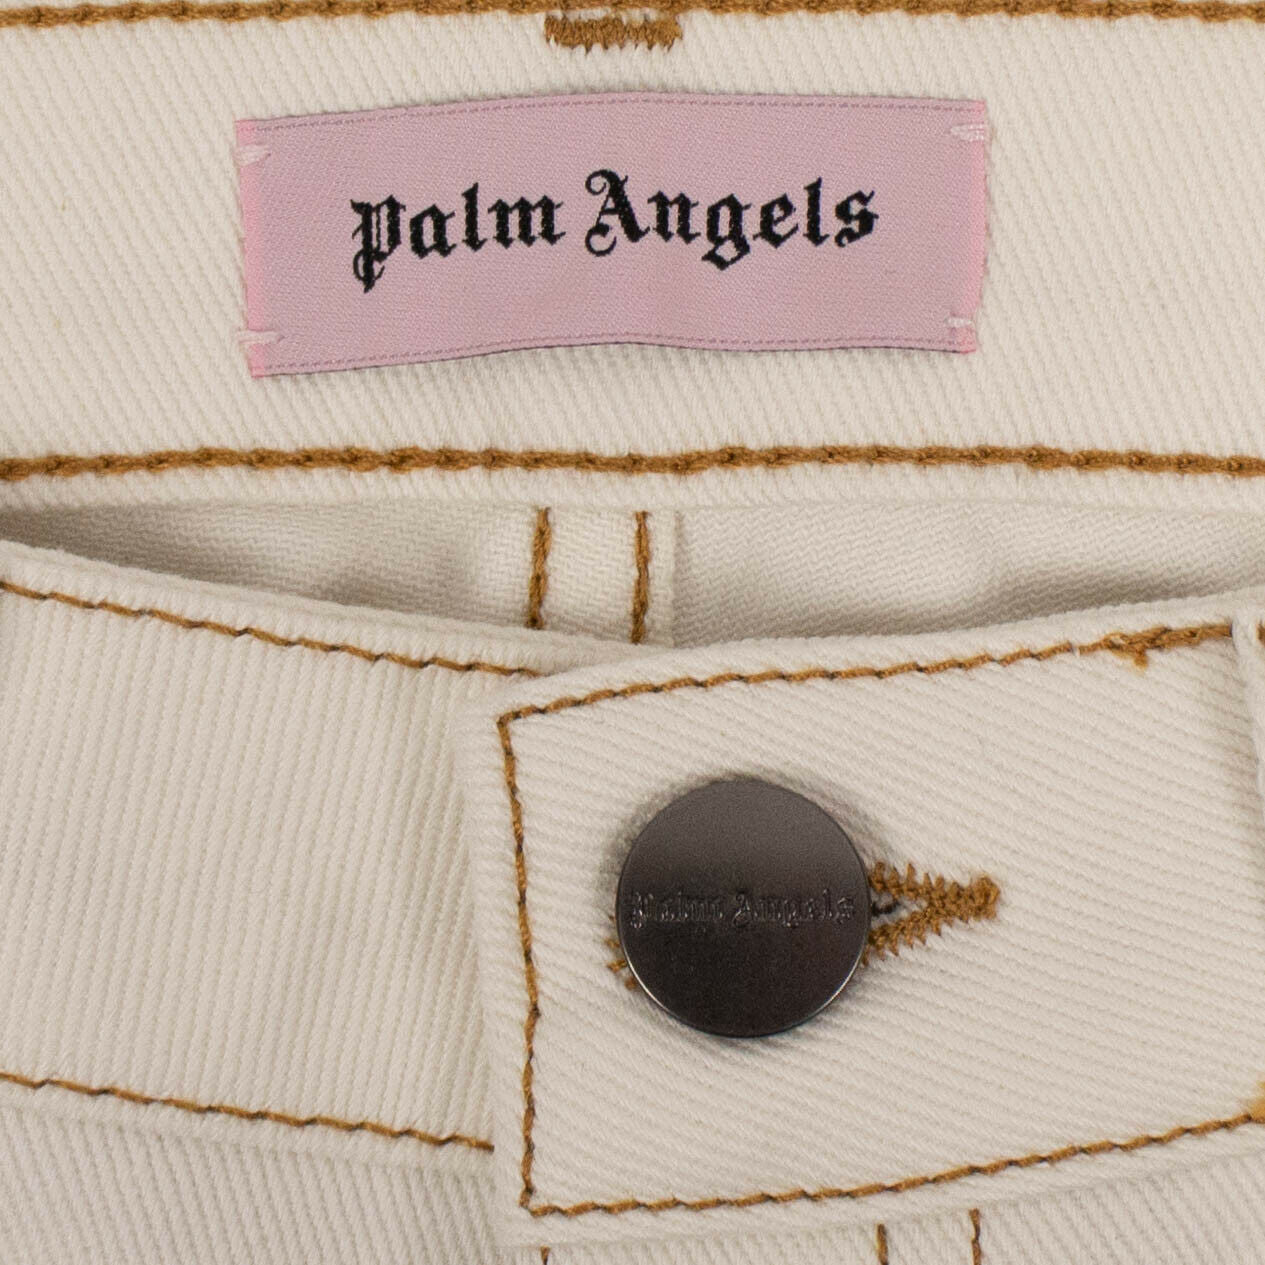 Palm Angels Denim Yellow Stripped Stretch Jeans Pants - White